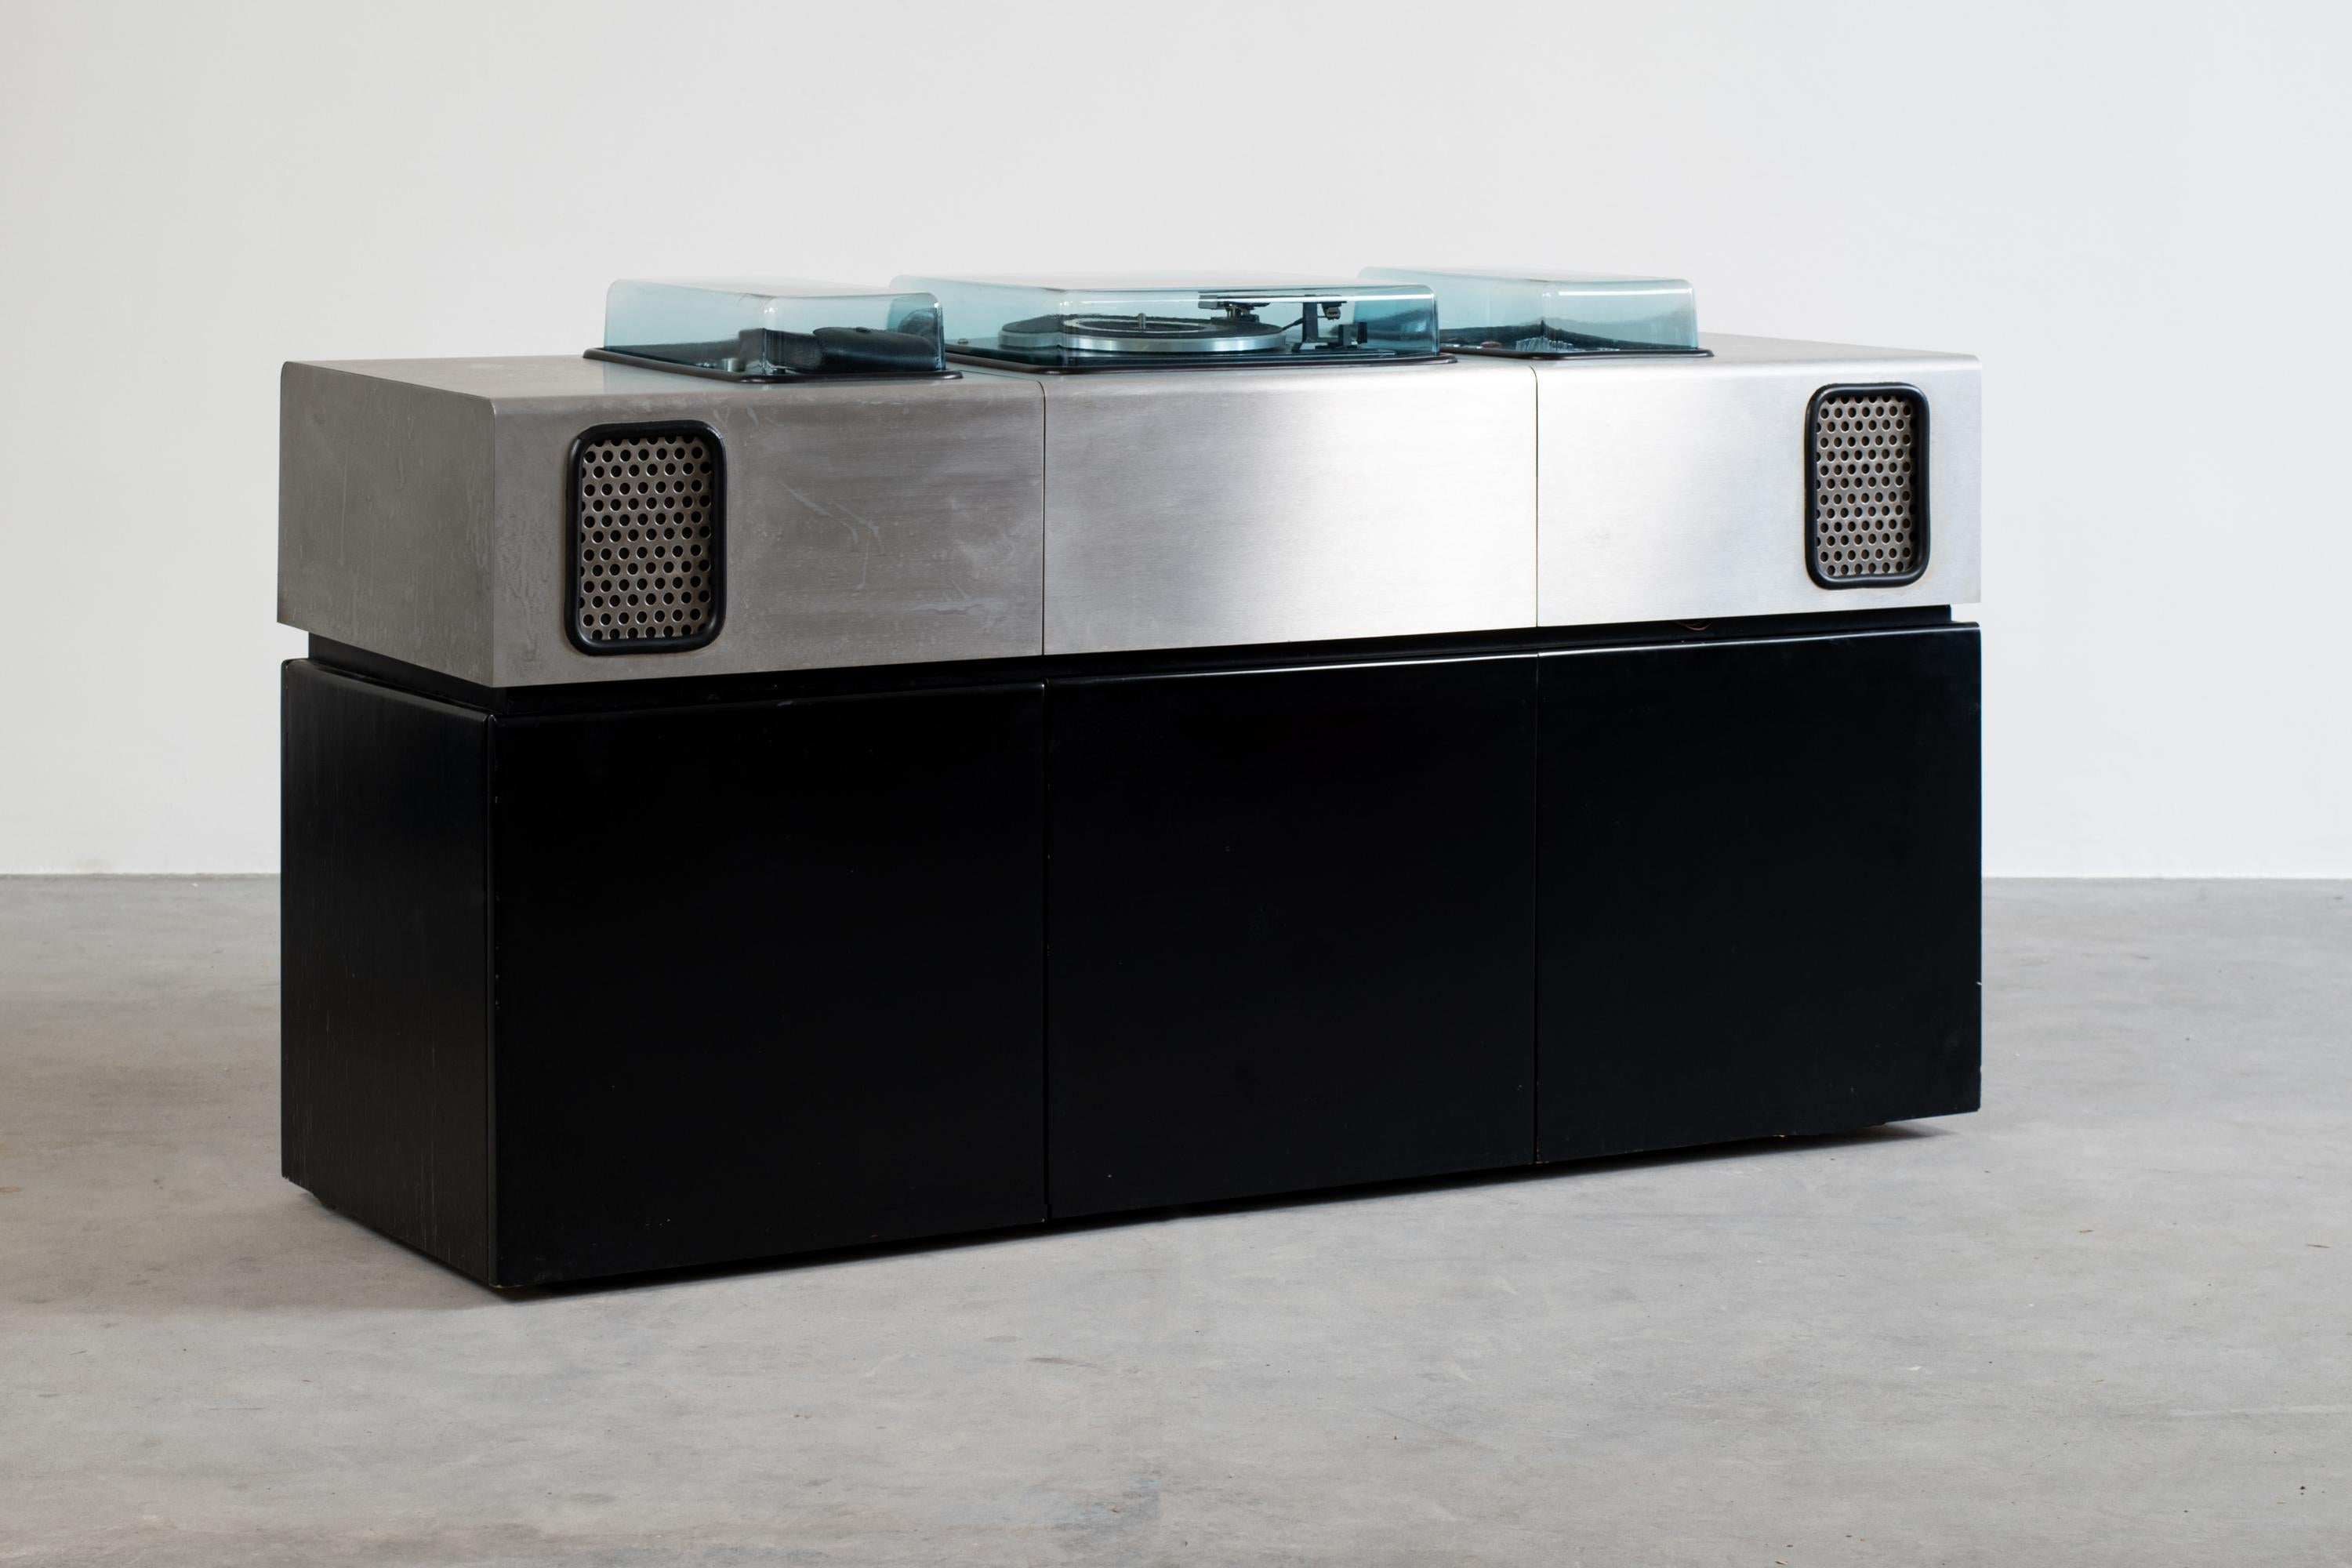 Extremely rare music sideboard with a refrigerated bar designed by Adalberto Dal Lago and Adam Tihany for Giuseppe Rossi di Albizzate, 1974, Italy. Turntable, 8 track cassette, radio and amplifier with two built-in loudspeakers.
Structure in